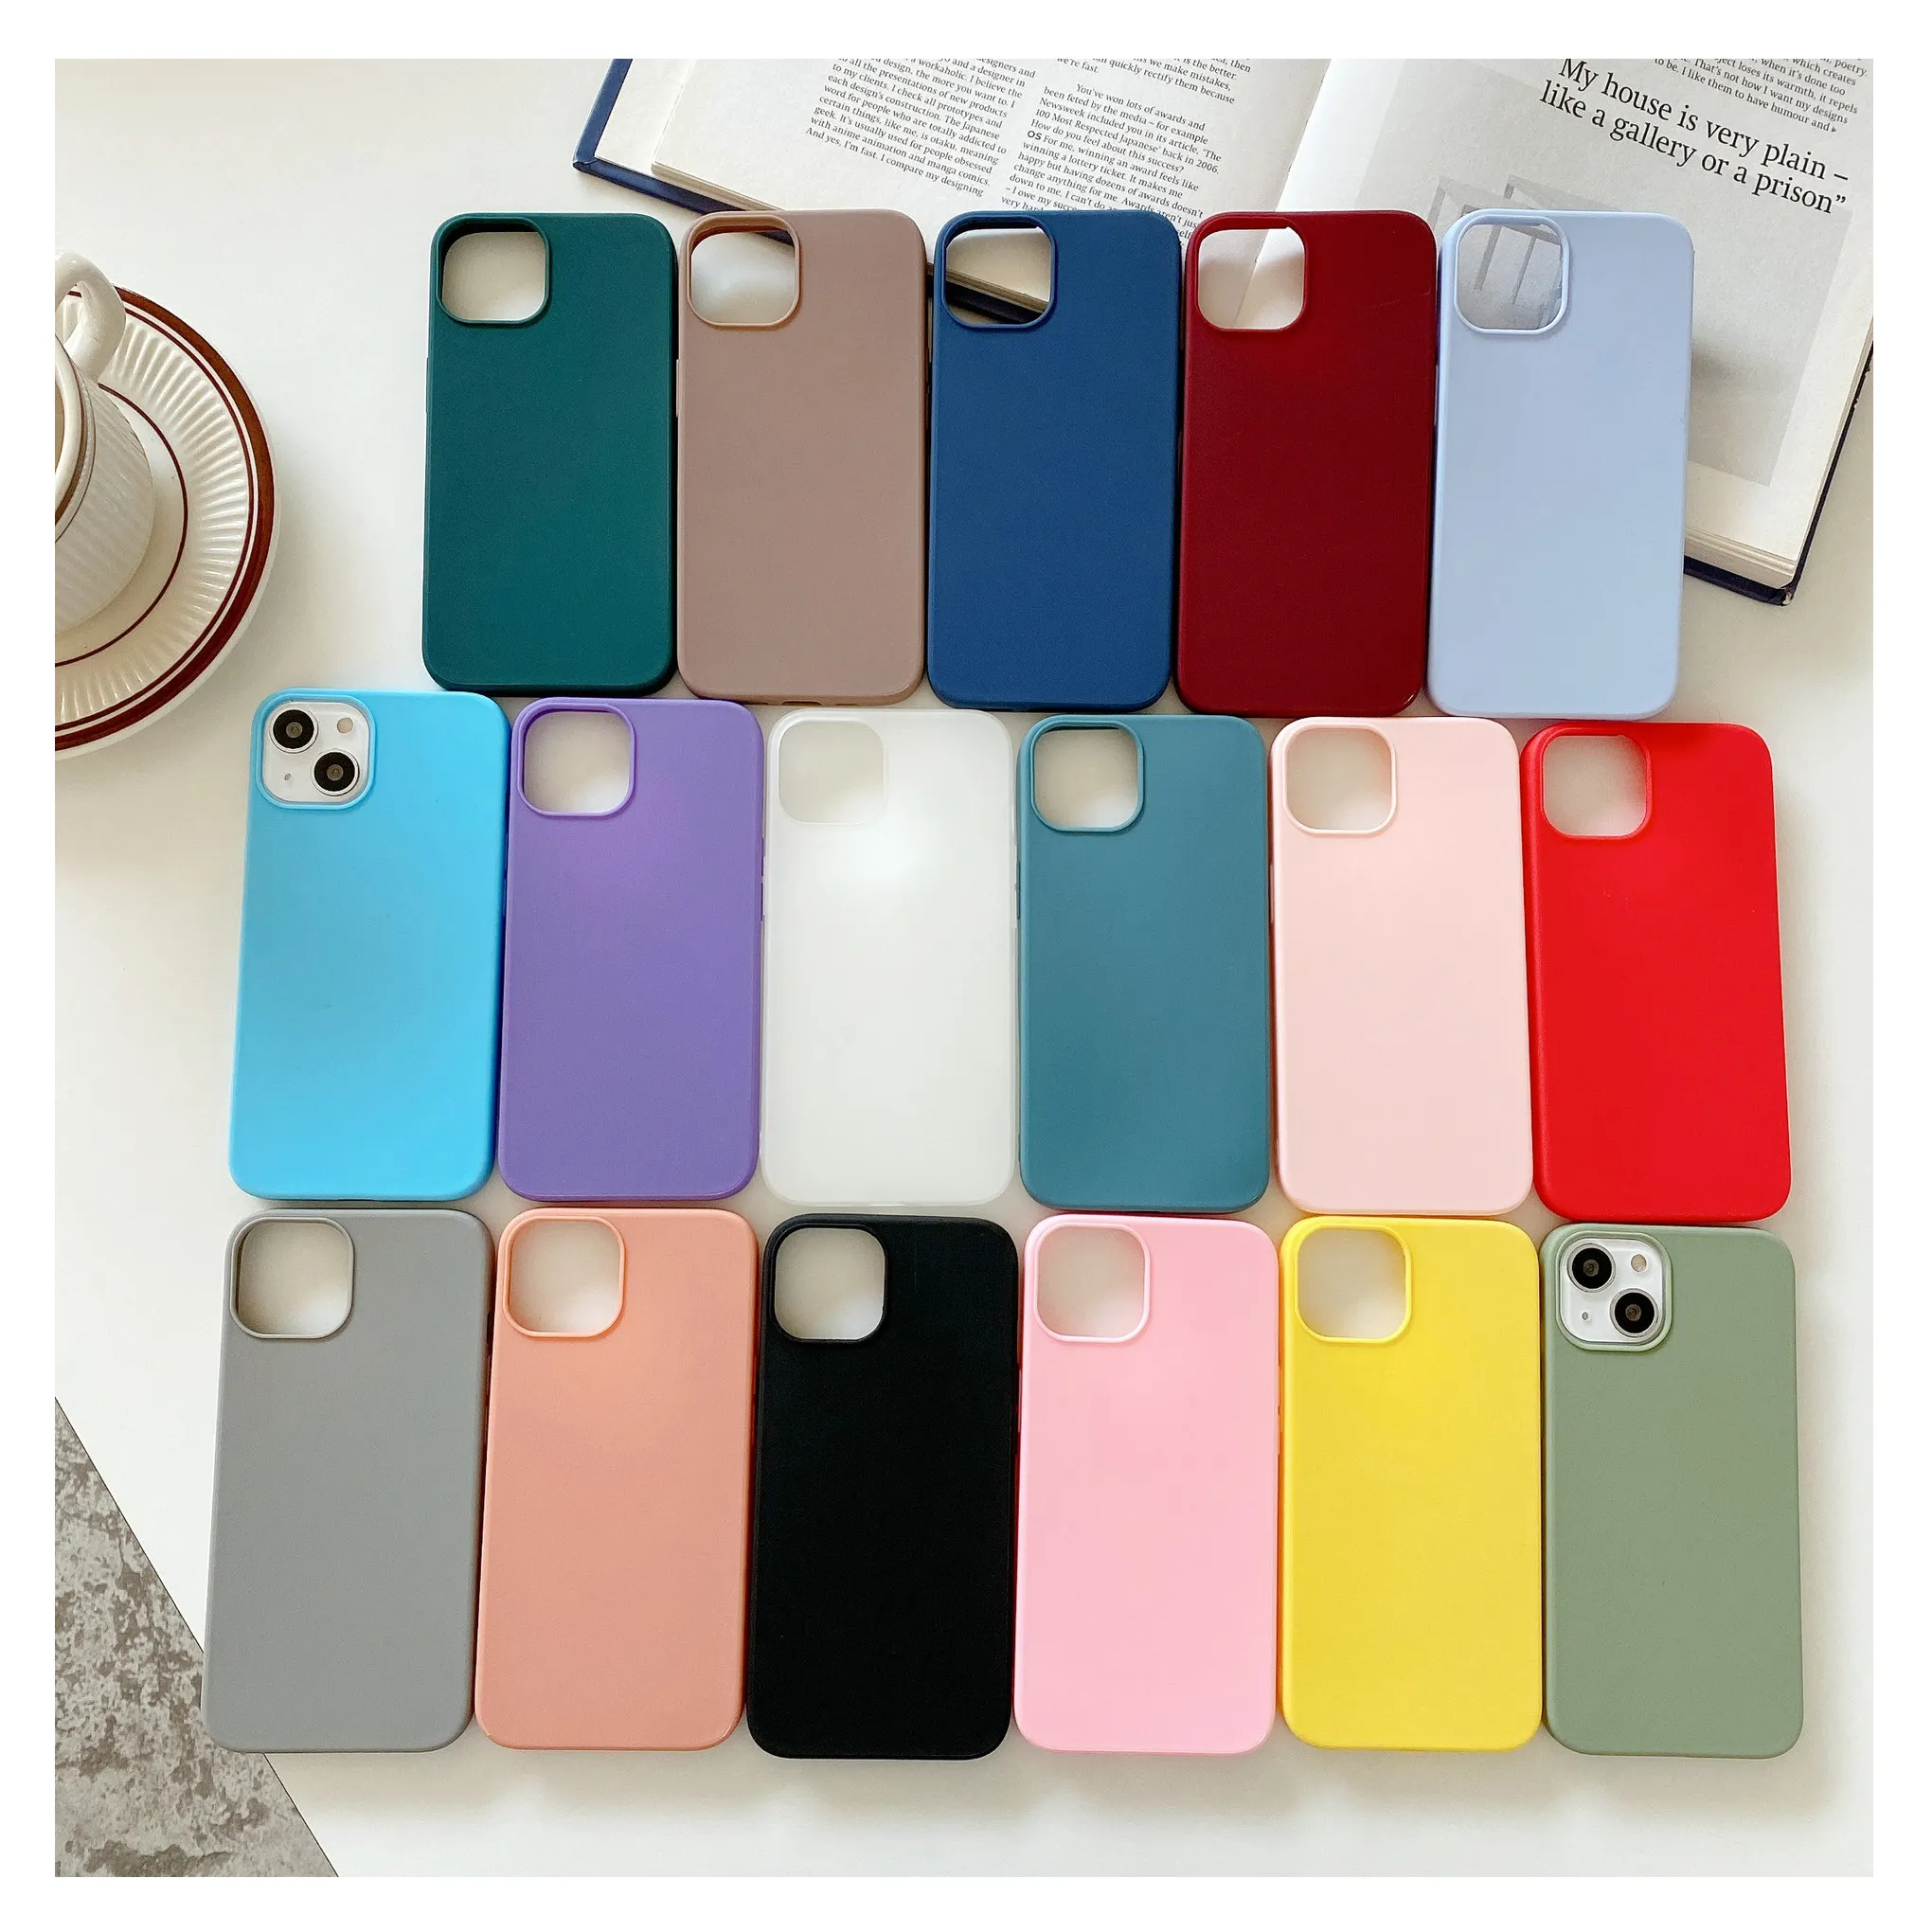 Full boby Protection Shockproof Soft TPU Matte Protective Case for iPhone X XS XR 11 12 13 14 Pro plus MAX MINI